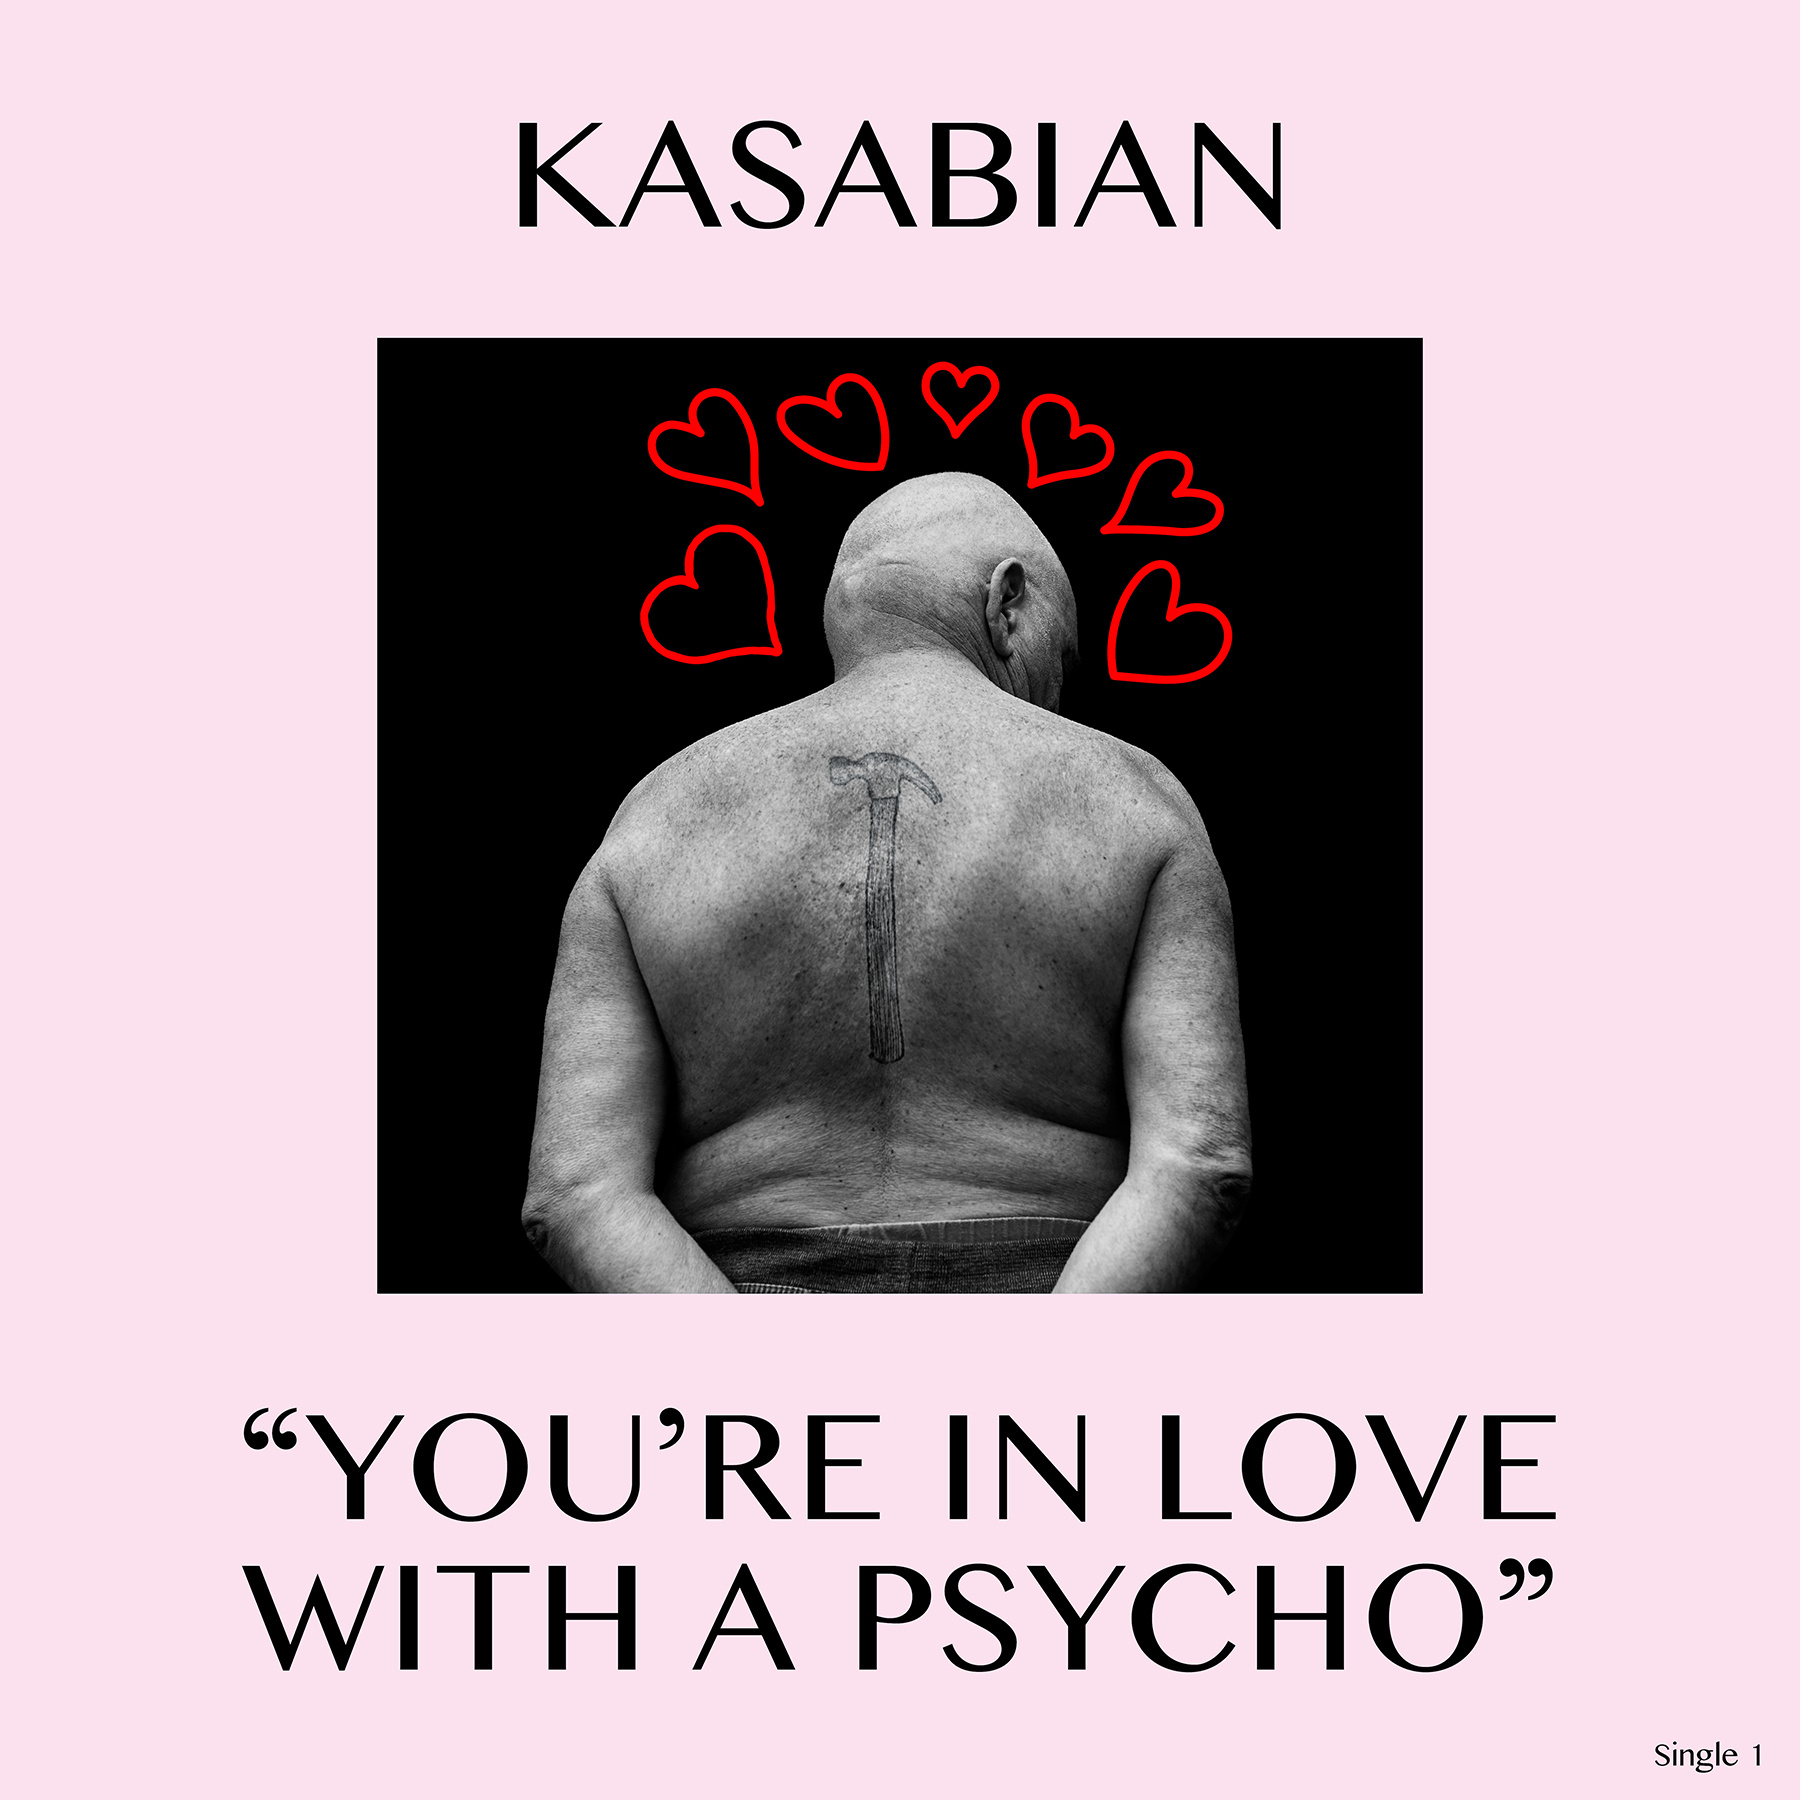 neil_bedford_aitor_throup_kasabian_album_artwork_for_crying_out_loud_sony_records_psycho